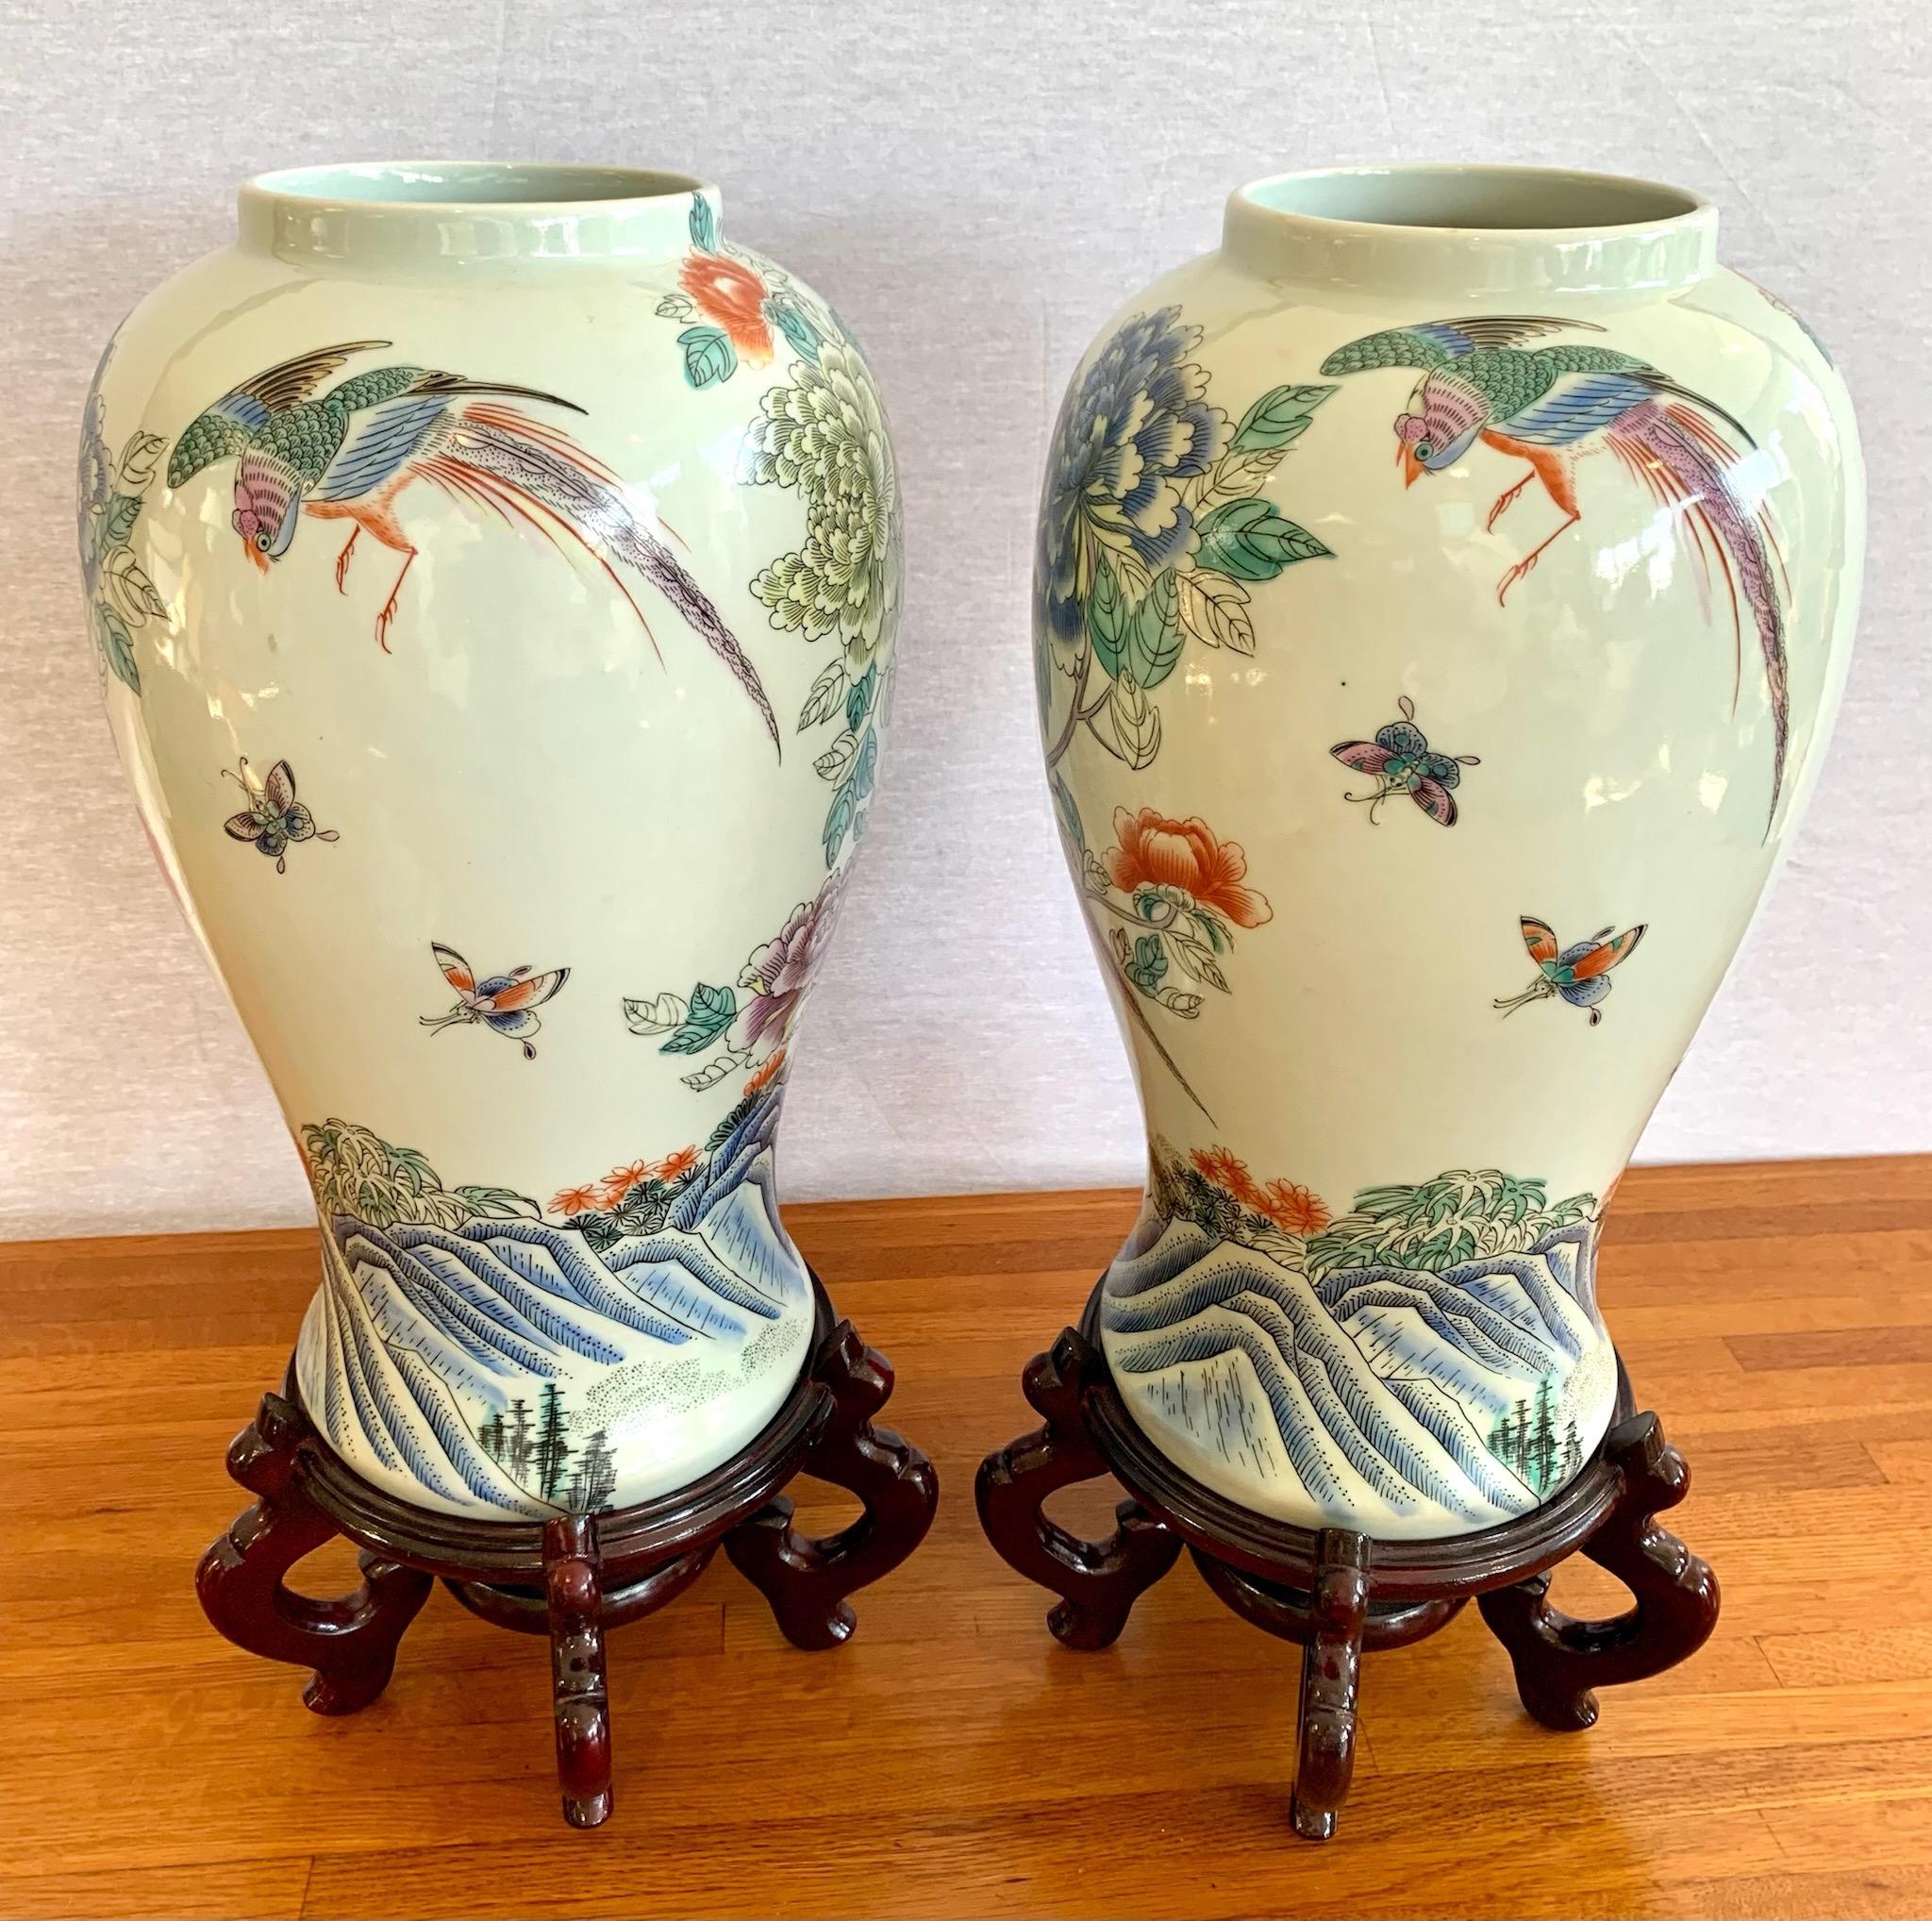 Chinese Export Porcelain Ginger Jars with Peonies, Matching Pair 2